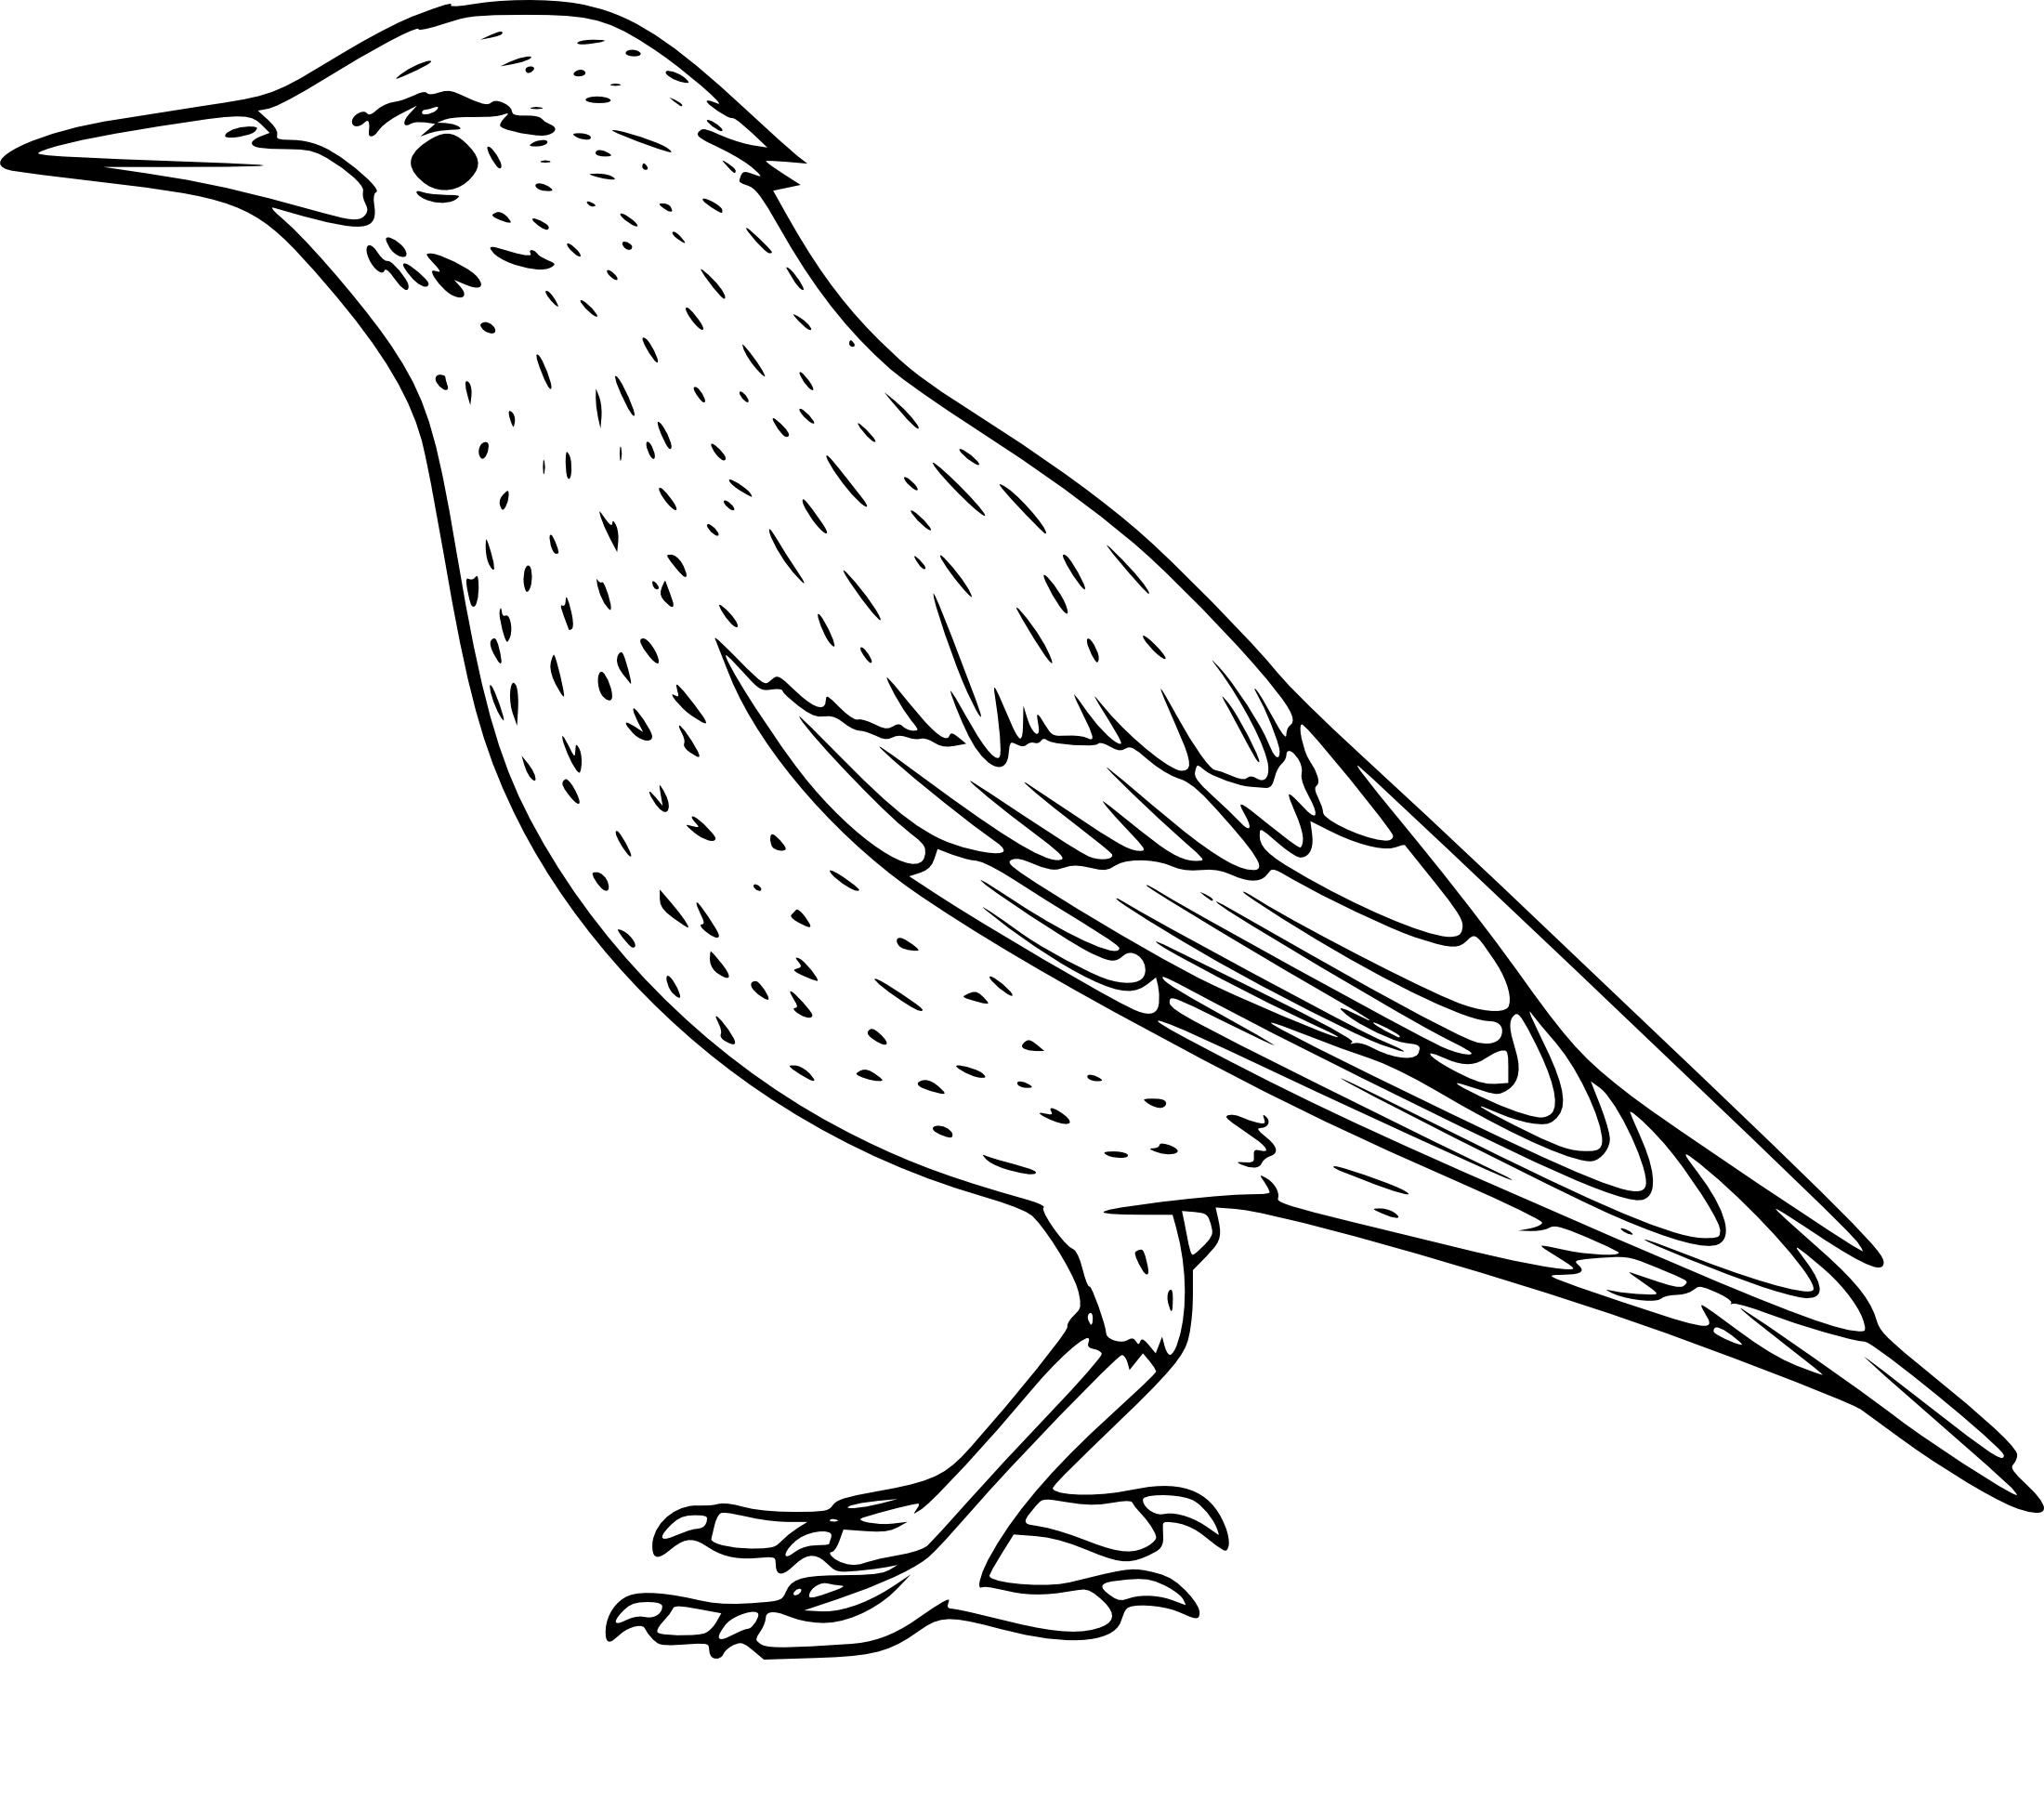 Starling coloring page